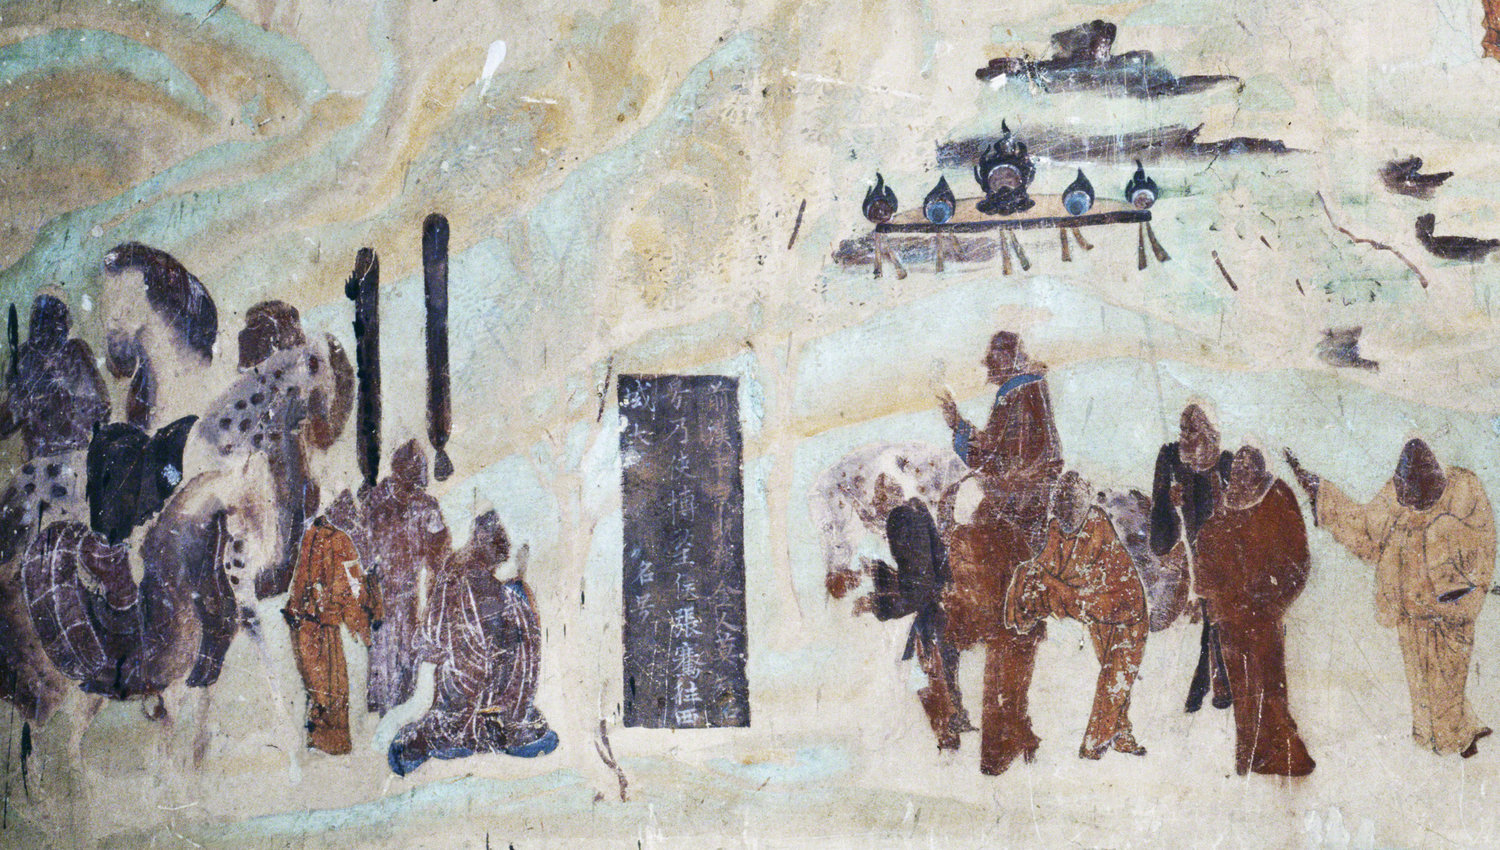 Detail of Emperor Wu on a horse sending off Zhang Qian who is kneeling, north wall fresco in Mogao Cave 323. Early Tang. Image Courtesy of the Dunhuang Academy.